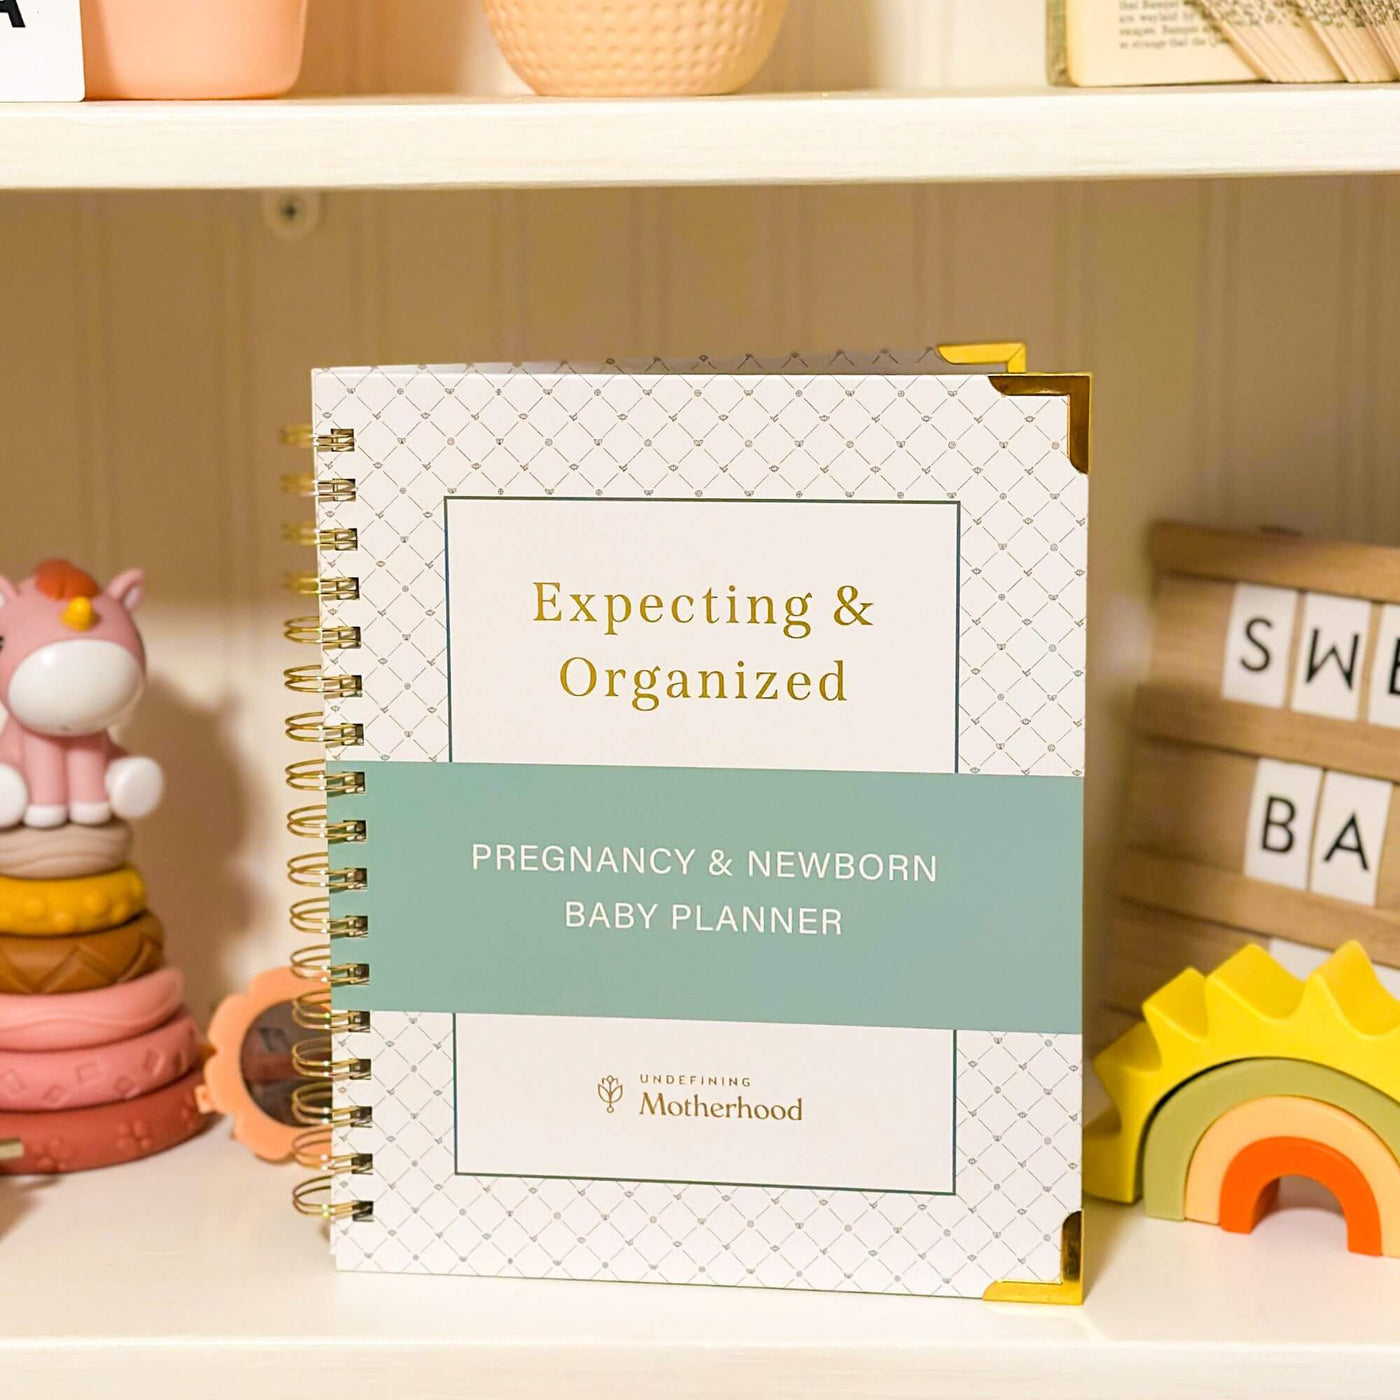 A white pregnancy planner with gold binding sits in the middle of a bookshelf, between baby toys and a letterboard that says sweet baby. The planner has a white cover with a green stripe and a small pattern design on the border. The cover of the book says Expecting & Organized: Pregnancy & Newborn Baby Planner by Undefining Motherhood. The title and company logo are gold foil stamped into the white cover, and the edges are secured with gold edging.